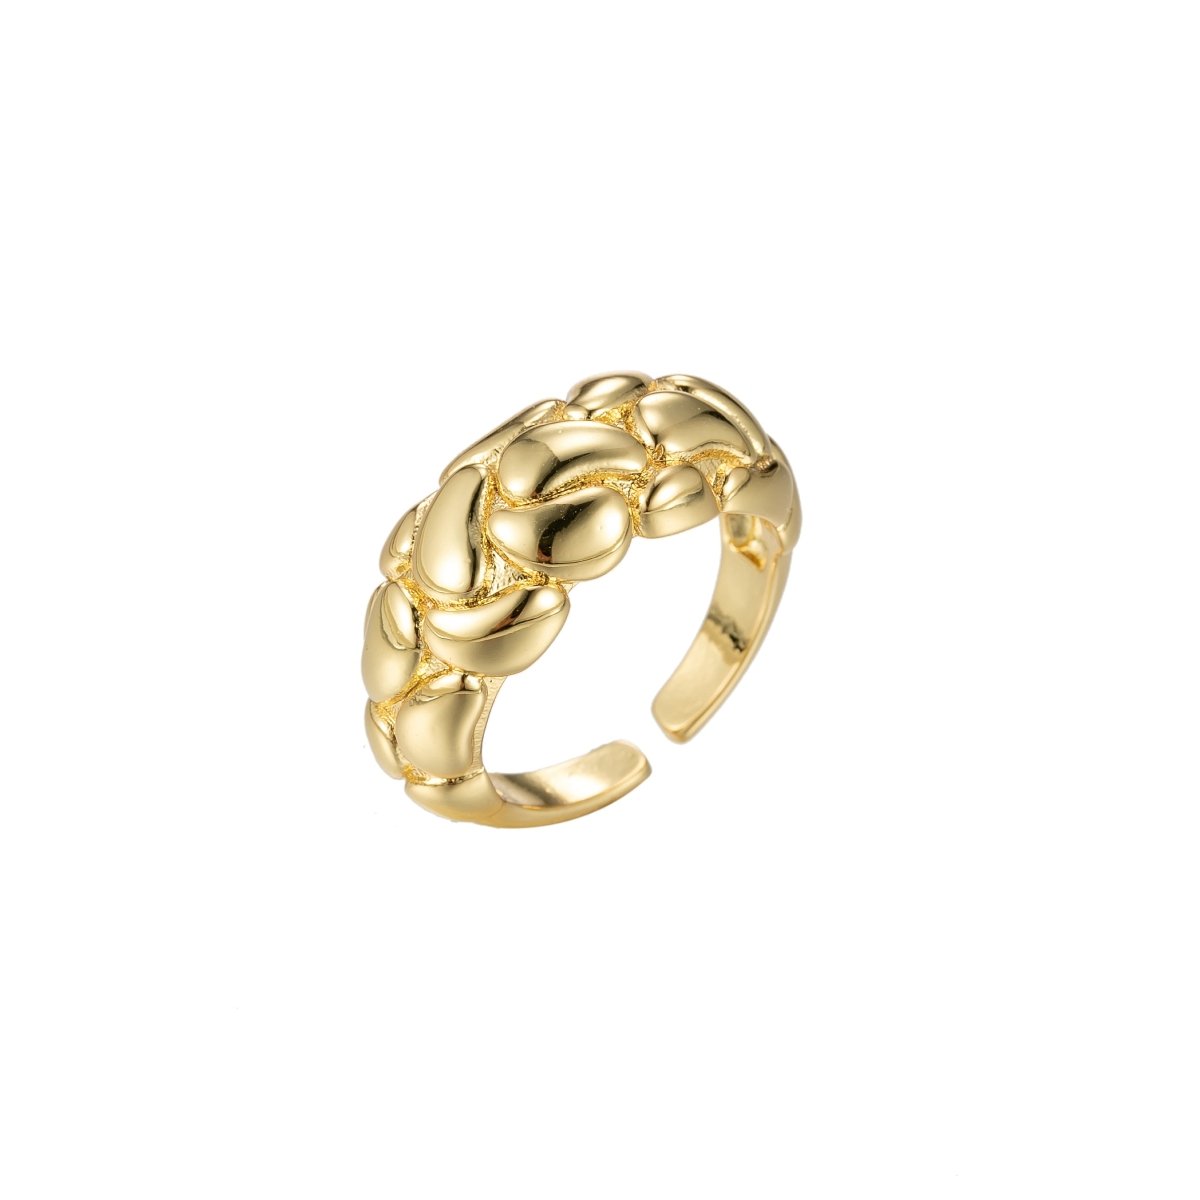 Gold Chunky Band Ring, Adjustable Ring, Statement Jewelry, stackable ring, Open Adjustbale ring O-340 - DLUXCA